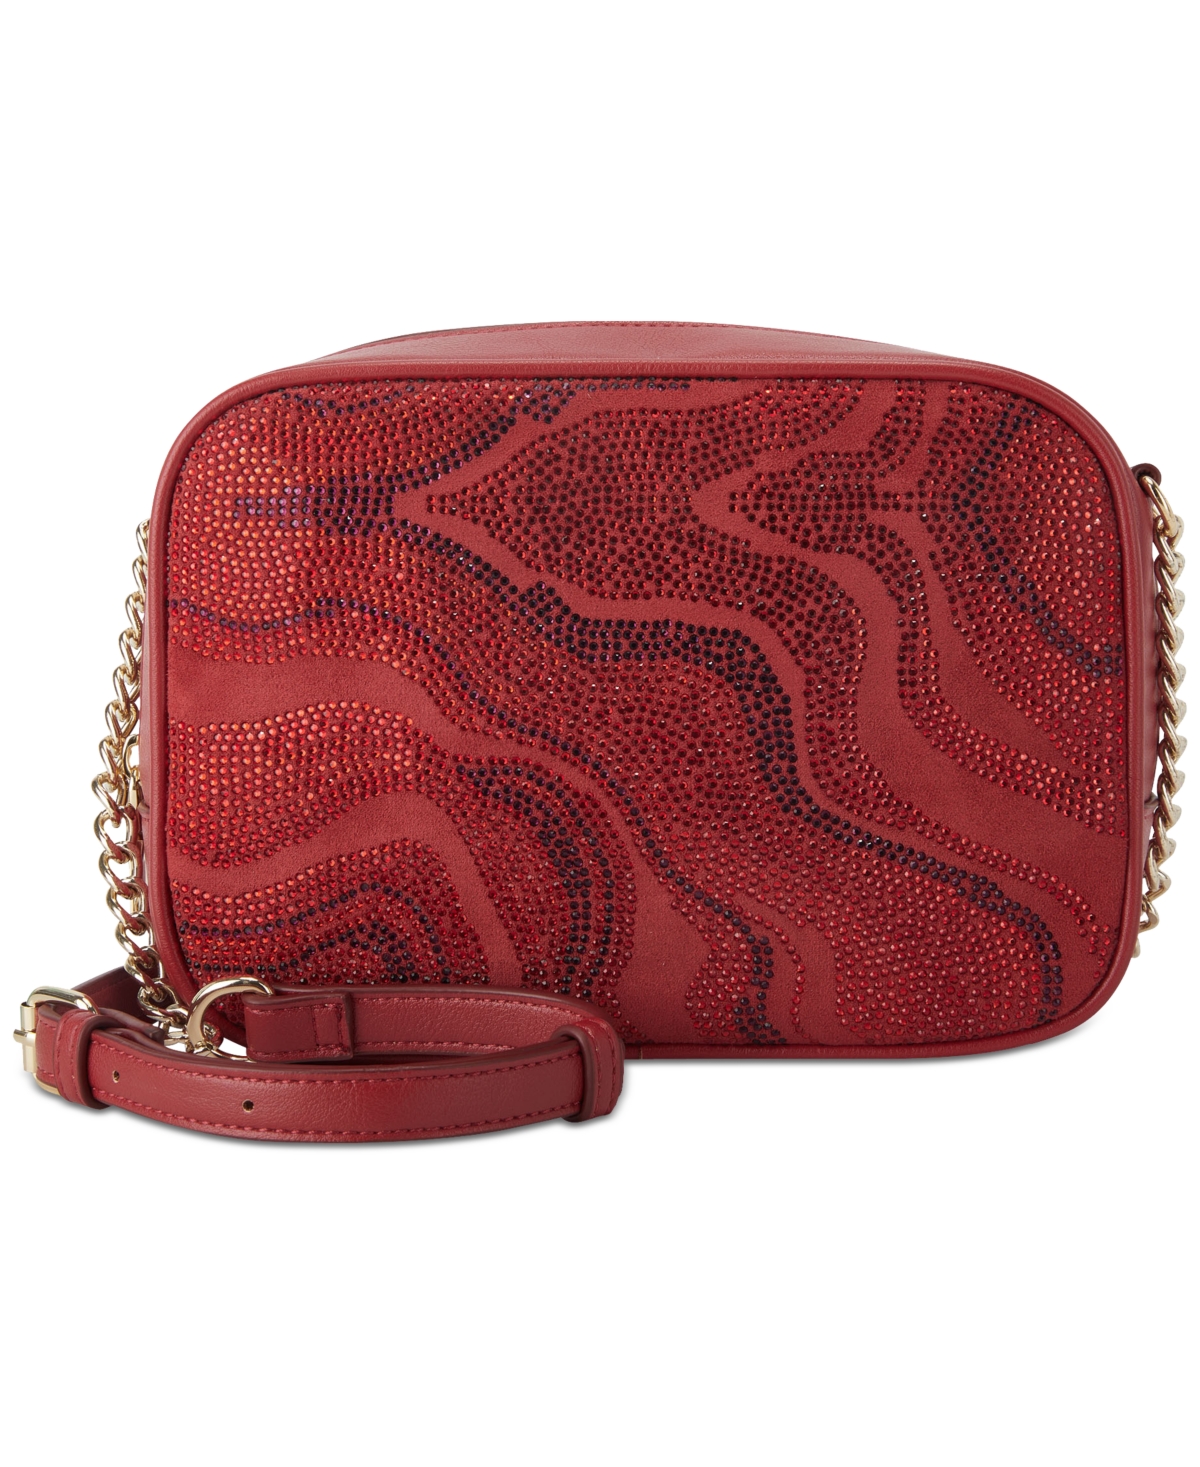 Inc International Concepts Clementinee Swirl Crossbody, Created For Macy's In Red Swirl Print